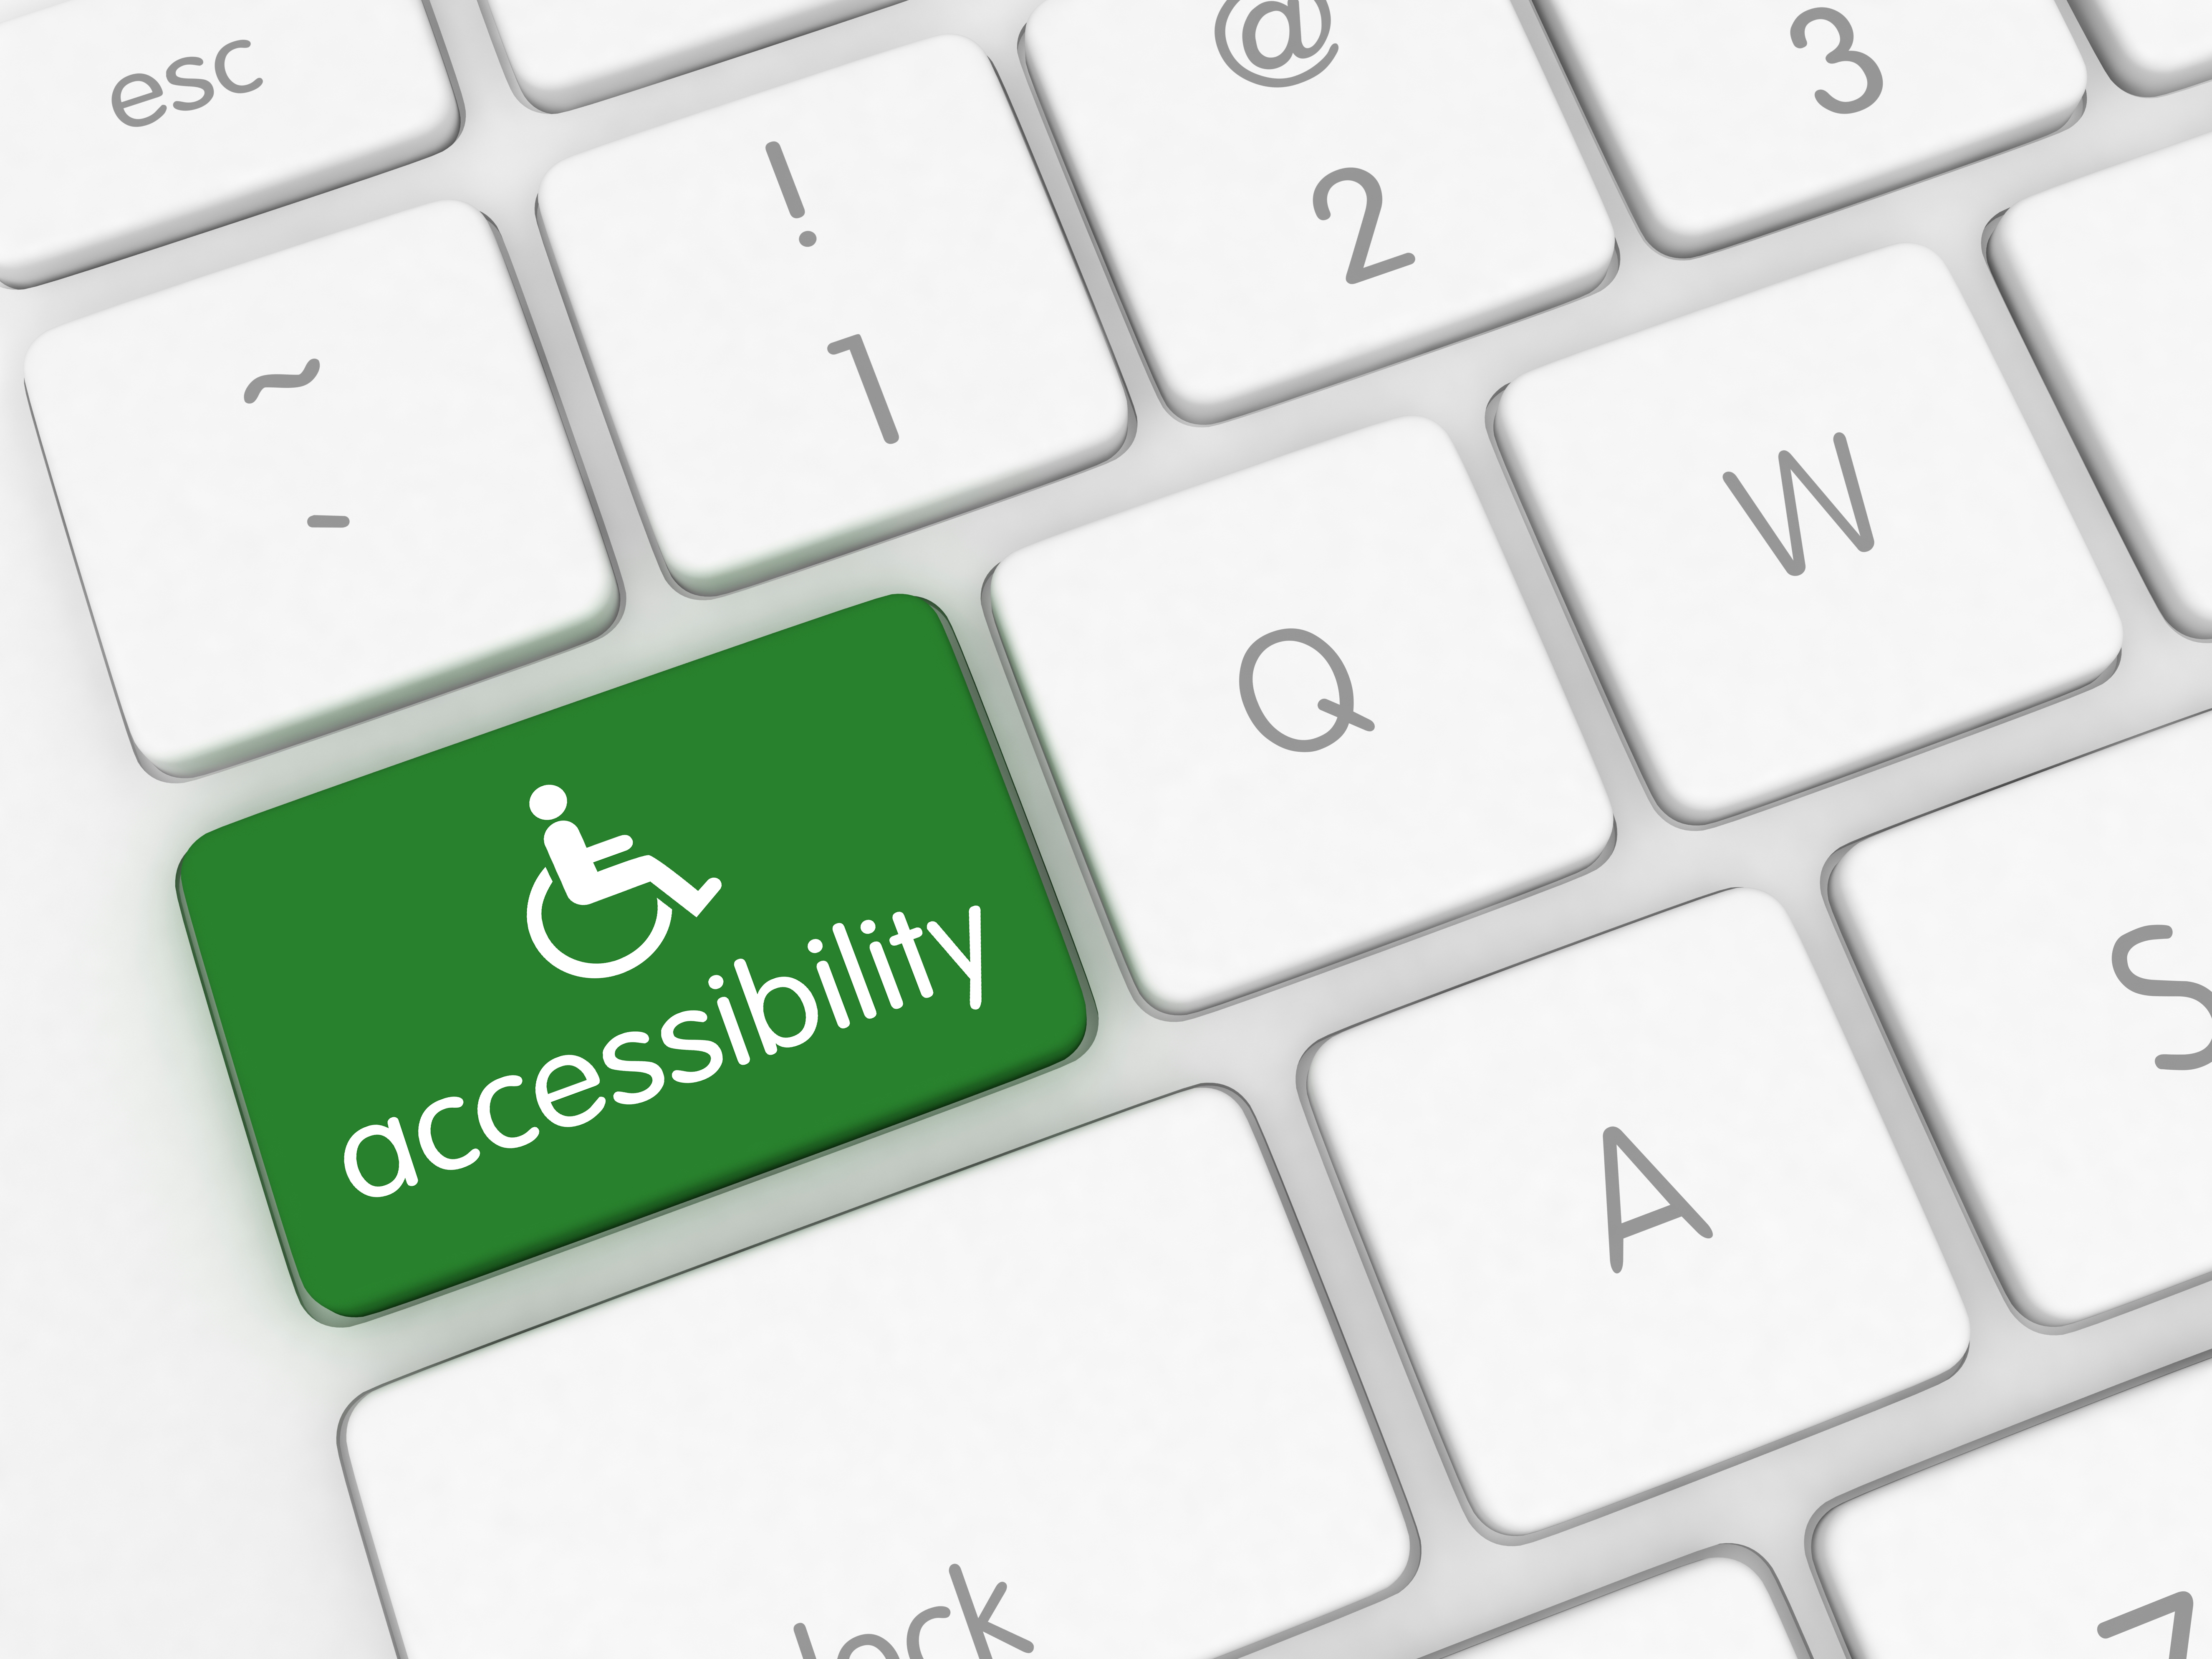 Close up of keyboard keys and one key is labeled accessibility with the wheelchair symbol